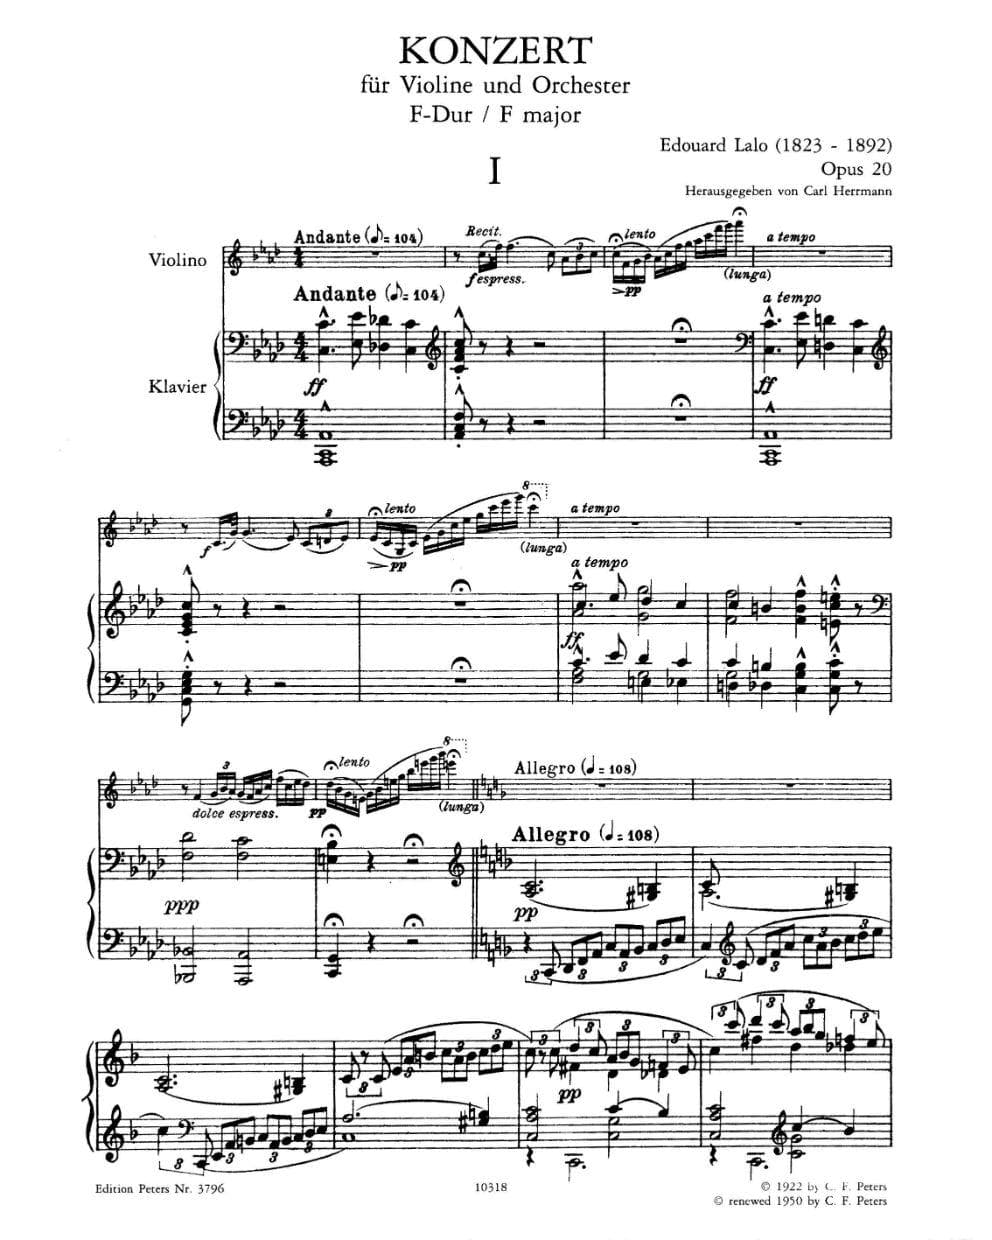 Lalo, Edouard - Concerto in F Major, Op 20 - Violin and Piano - edited by Carl Herrmann - Edition Peters